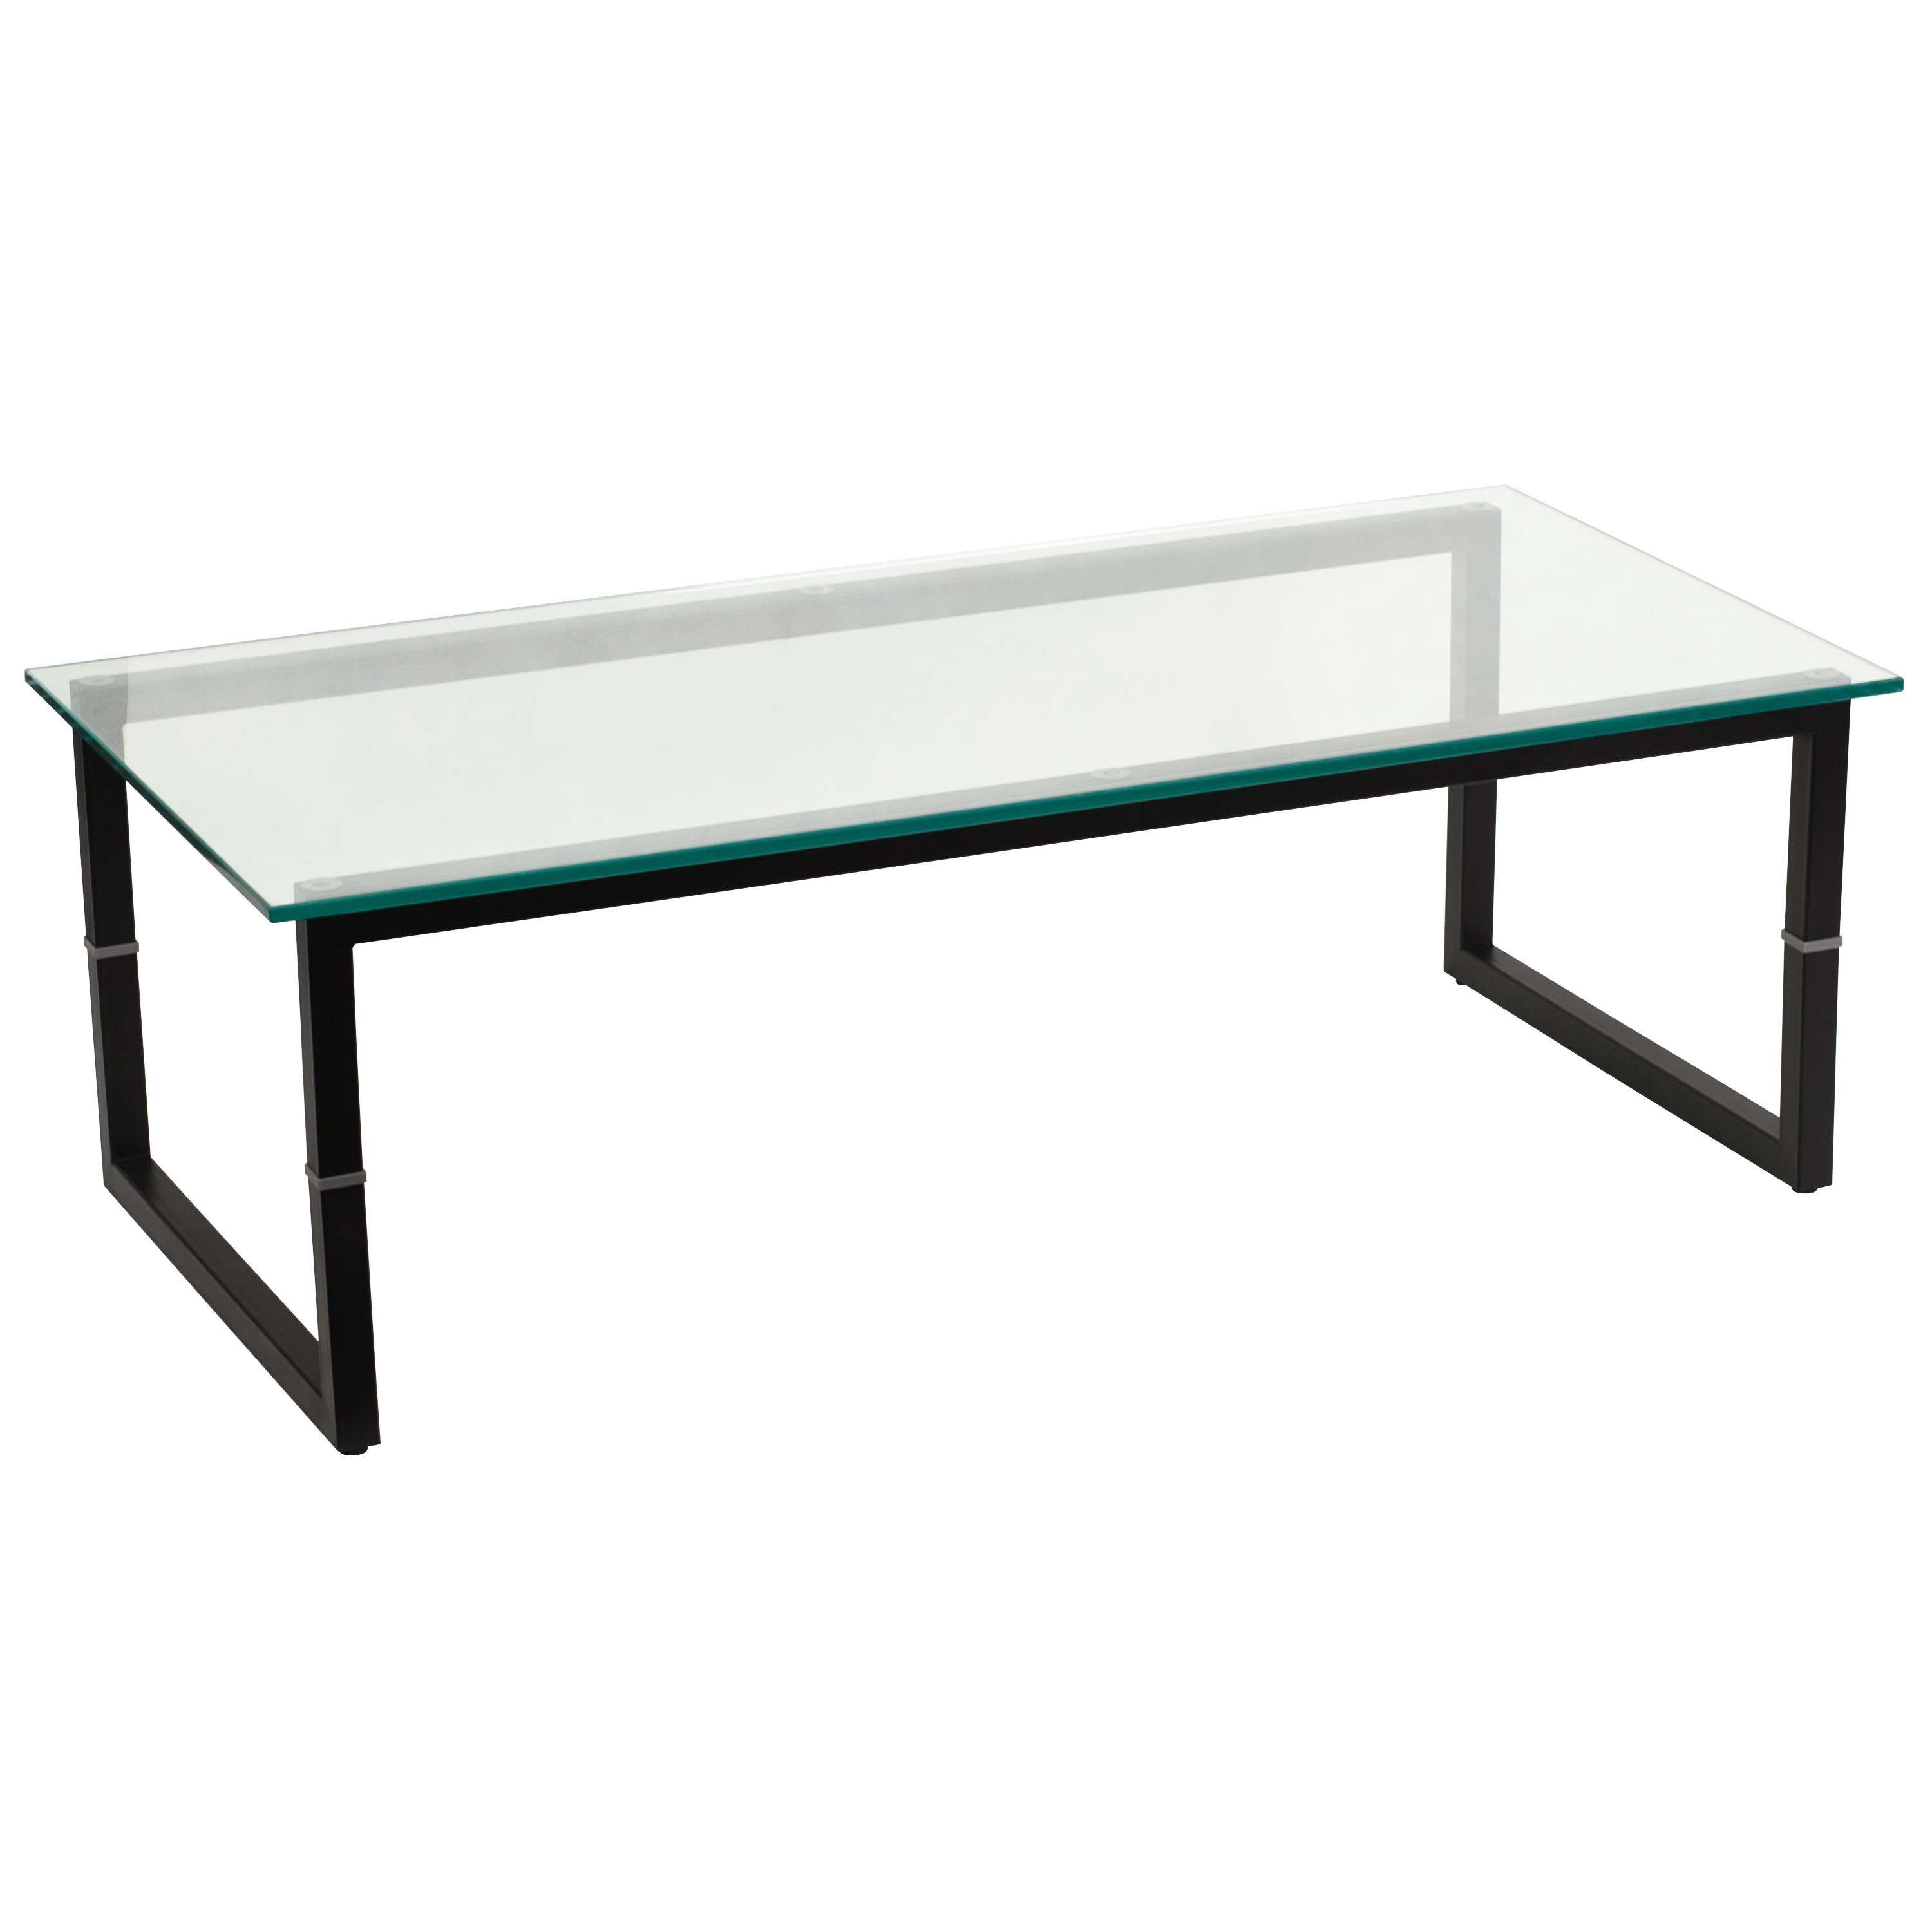 Trendy Extra Long Coffee Tables Intended For Long Thin Coffee Table This Is Definitely The Banquet Table Of (Gallery 20 of 20)